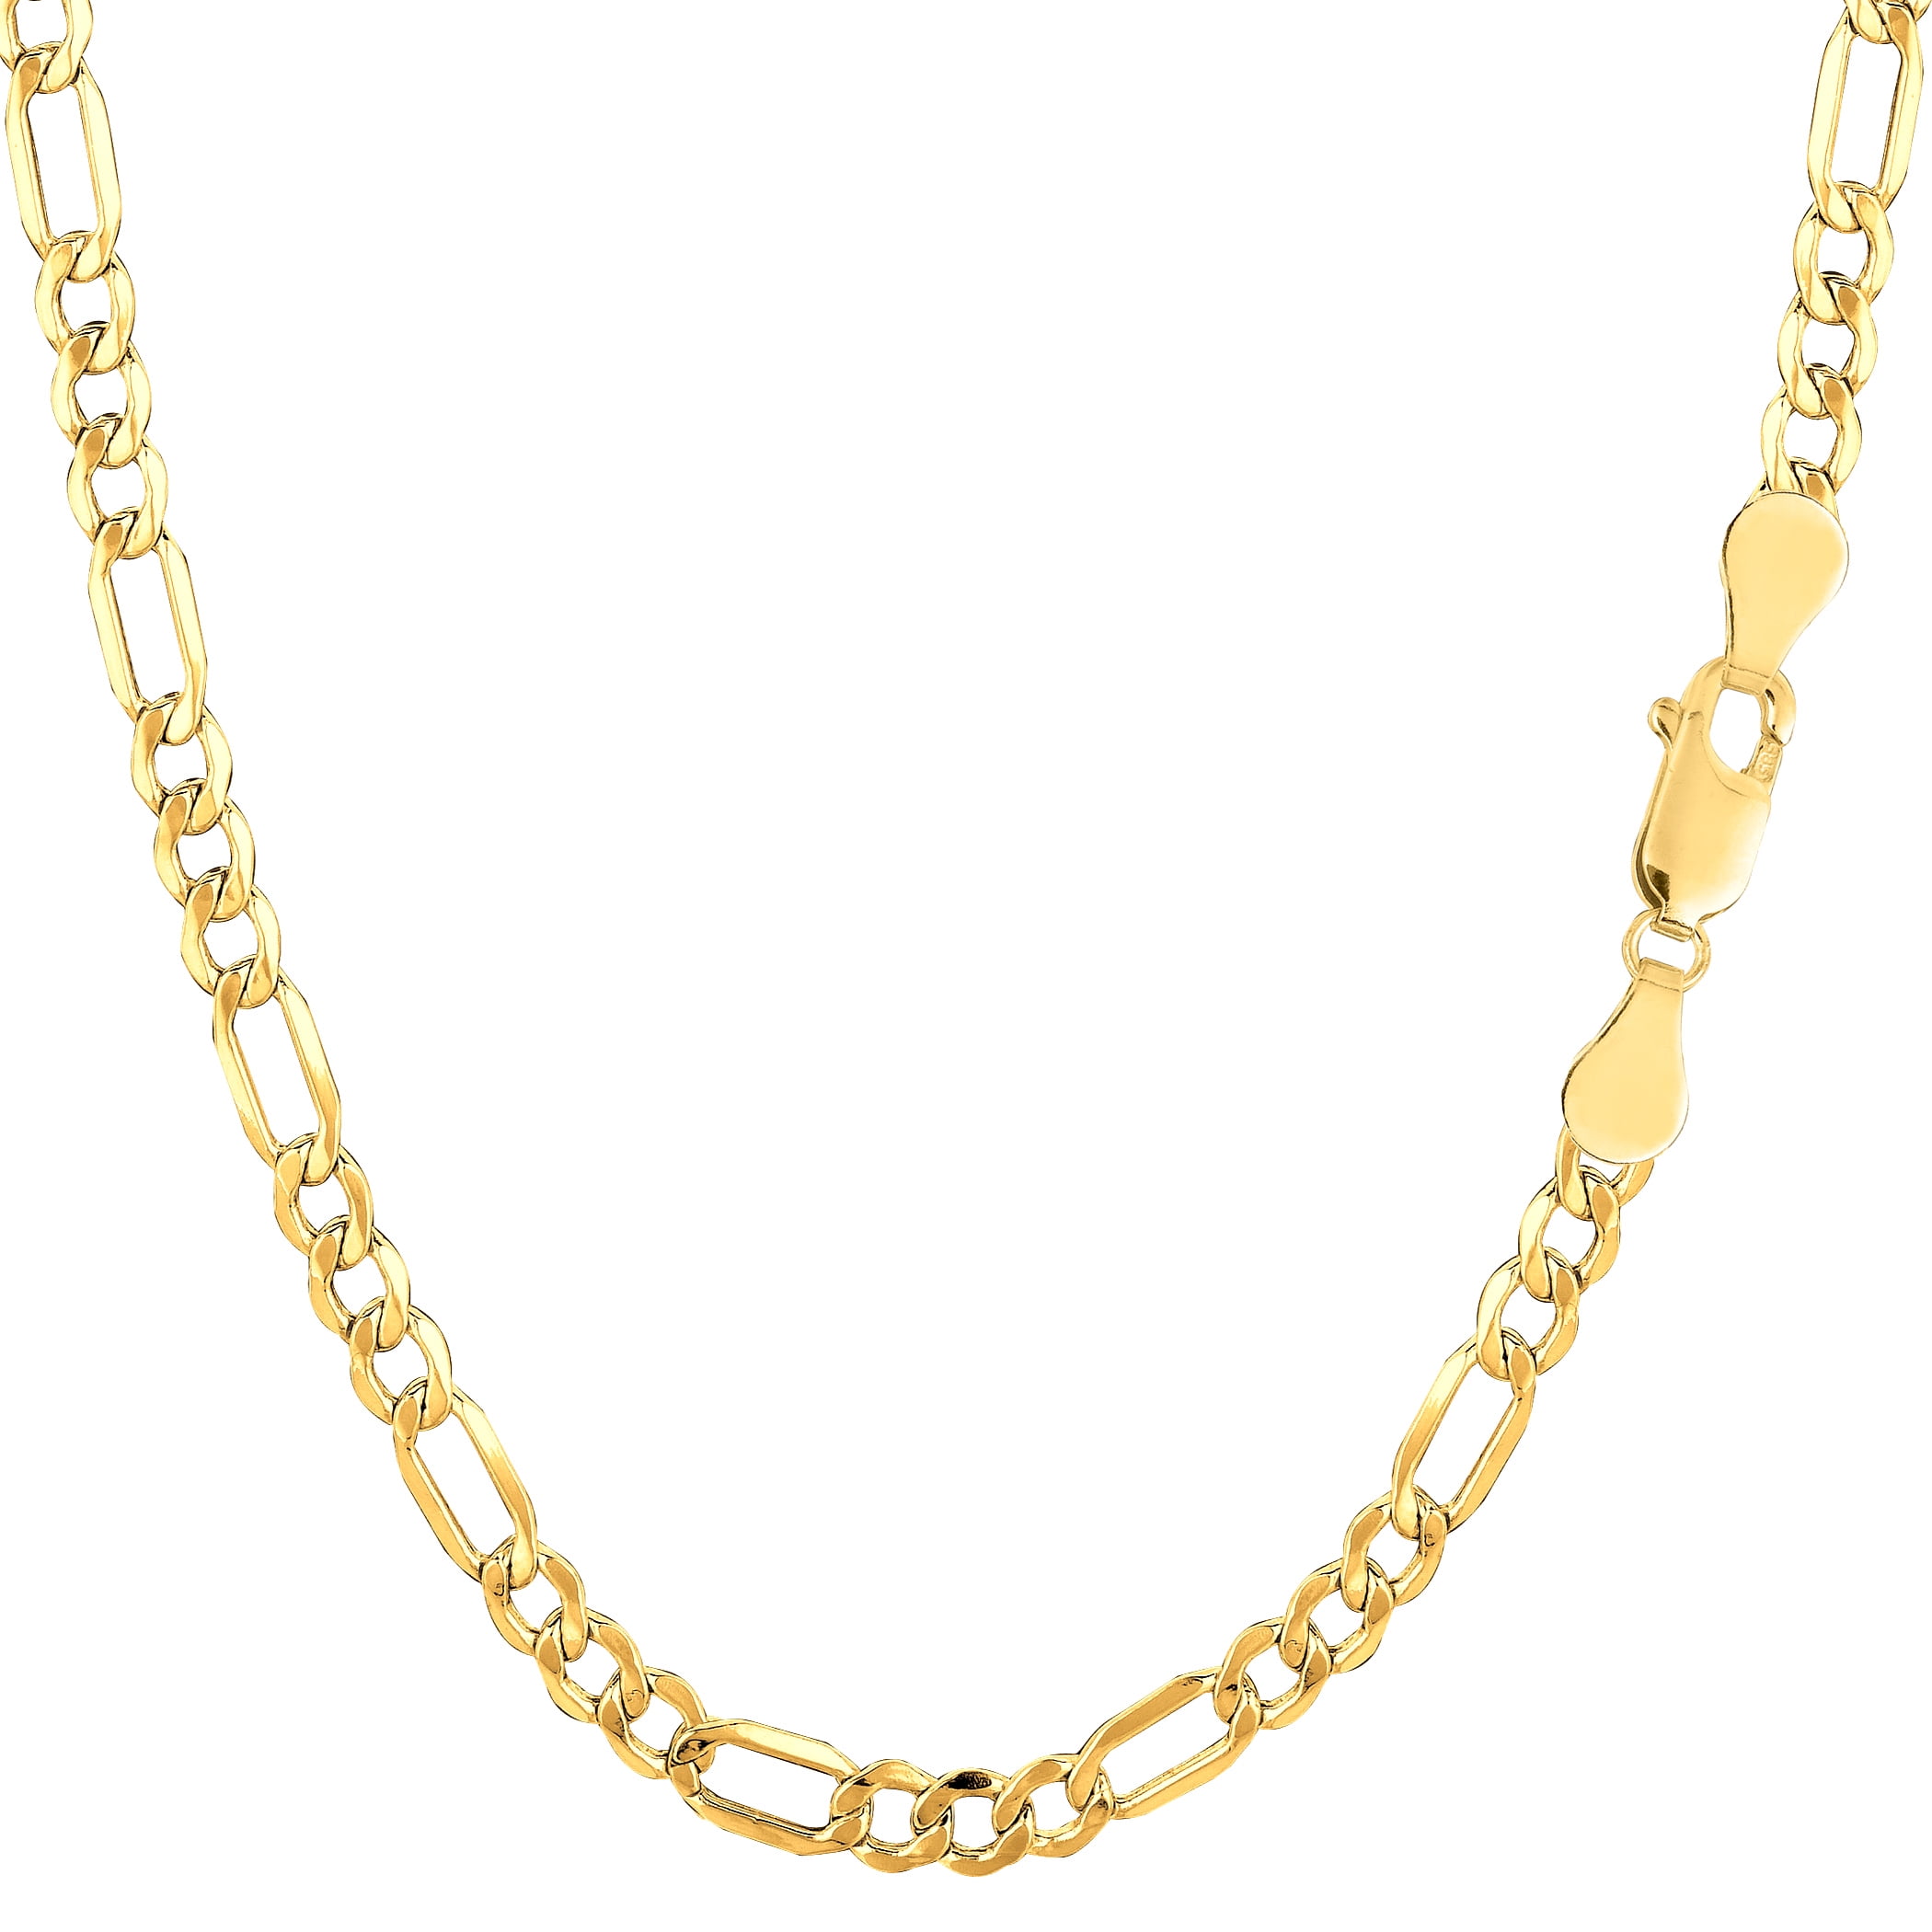 14K Yellow Gold Filled Solid Figaro Chain Bracelet, 4.0 mm, 8.5